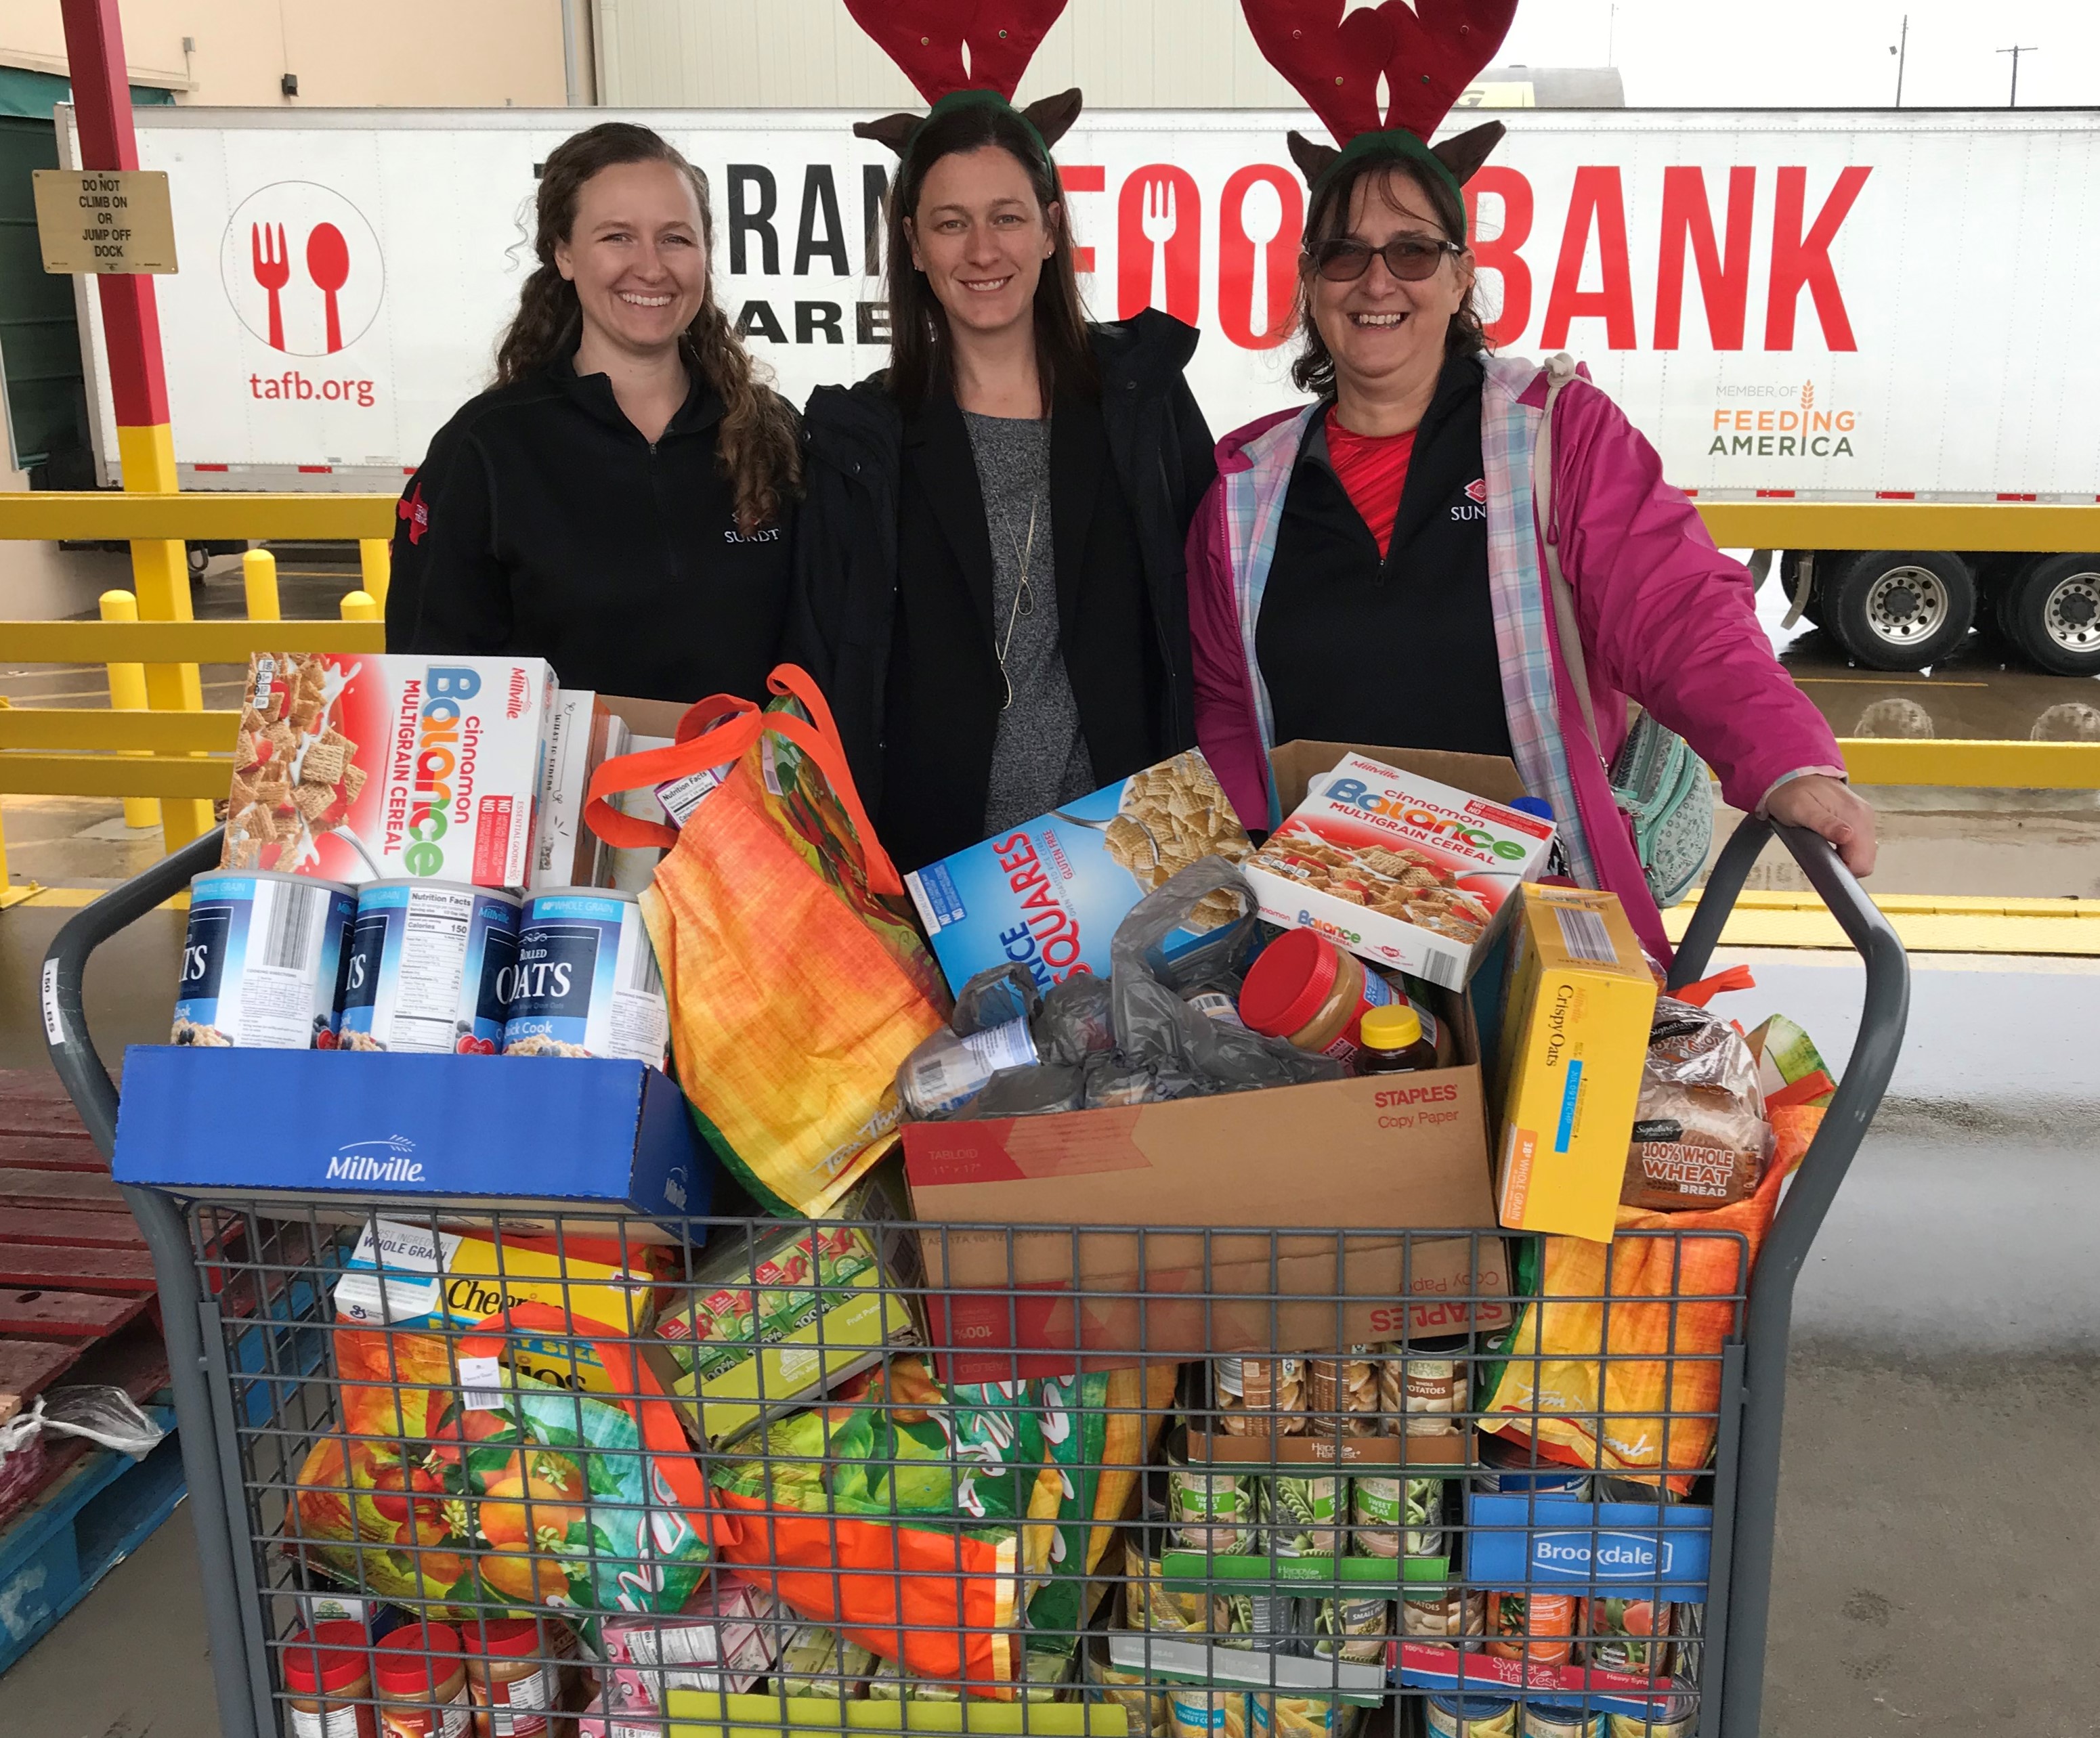 Our Fort Worth office participated in a canned food drive for the Tarrant Area Food Bank. Each month, TAFB and its partners provide groceries and/or meals to more than 53,000 households. 